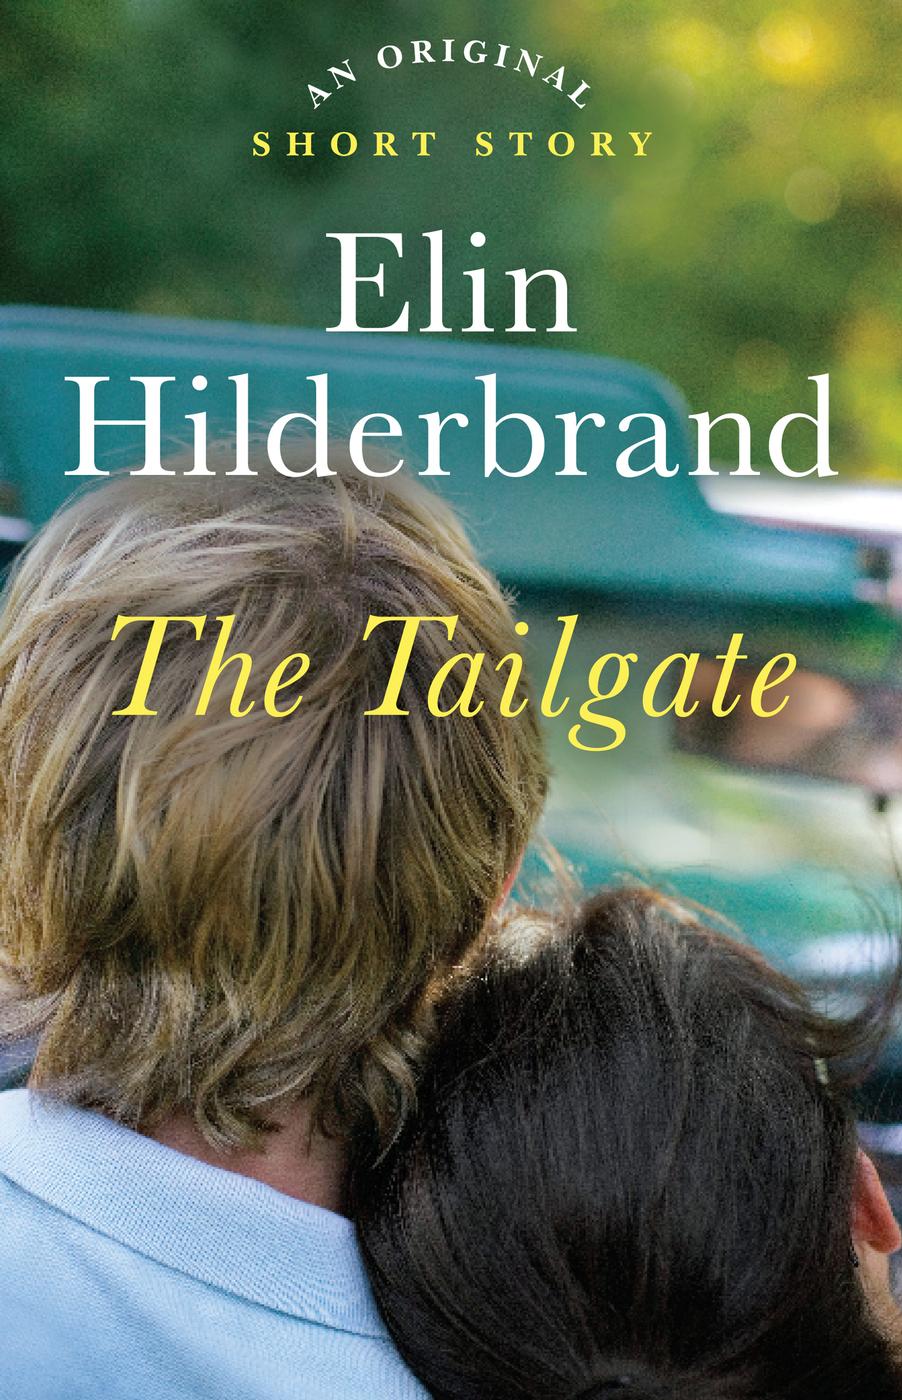 The Tailgate (2014) by Elin Hilderbrand